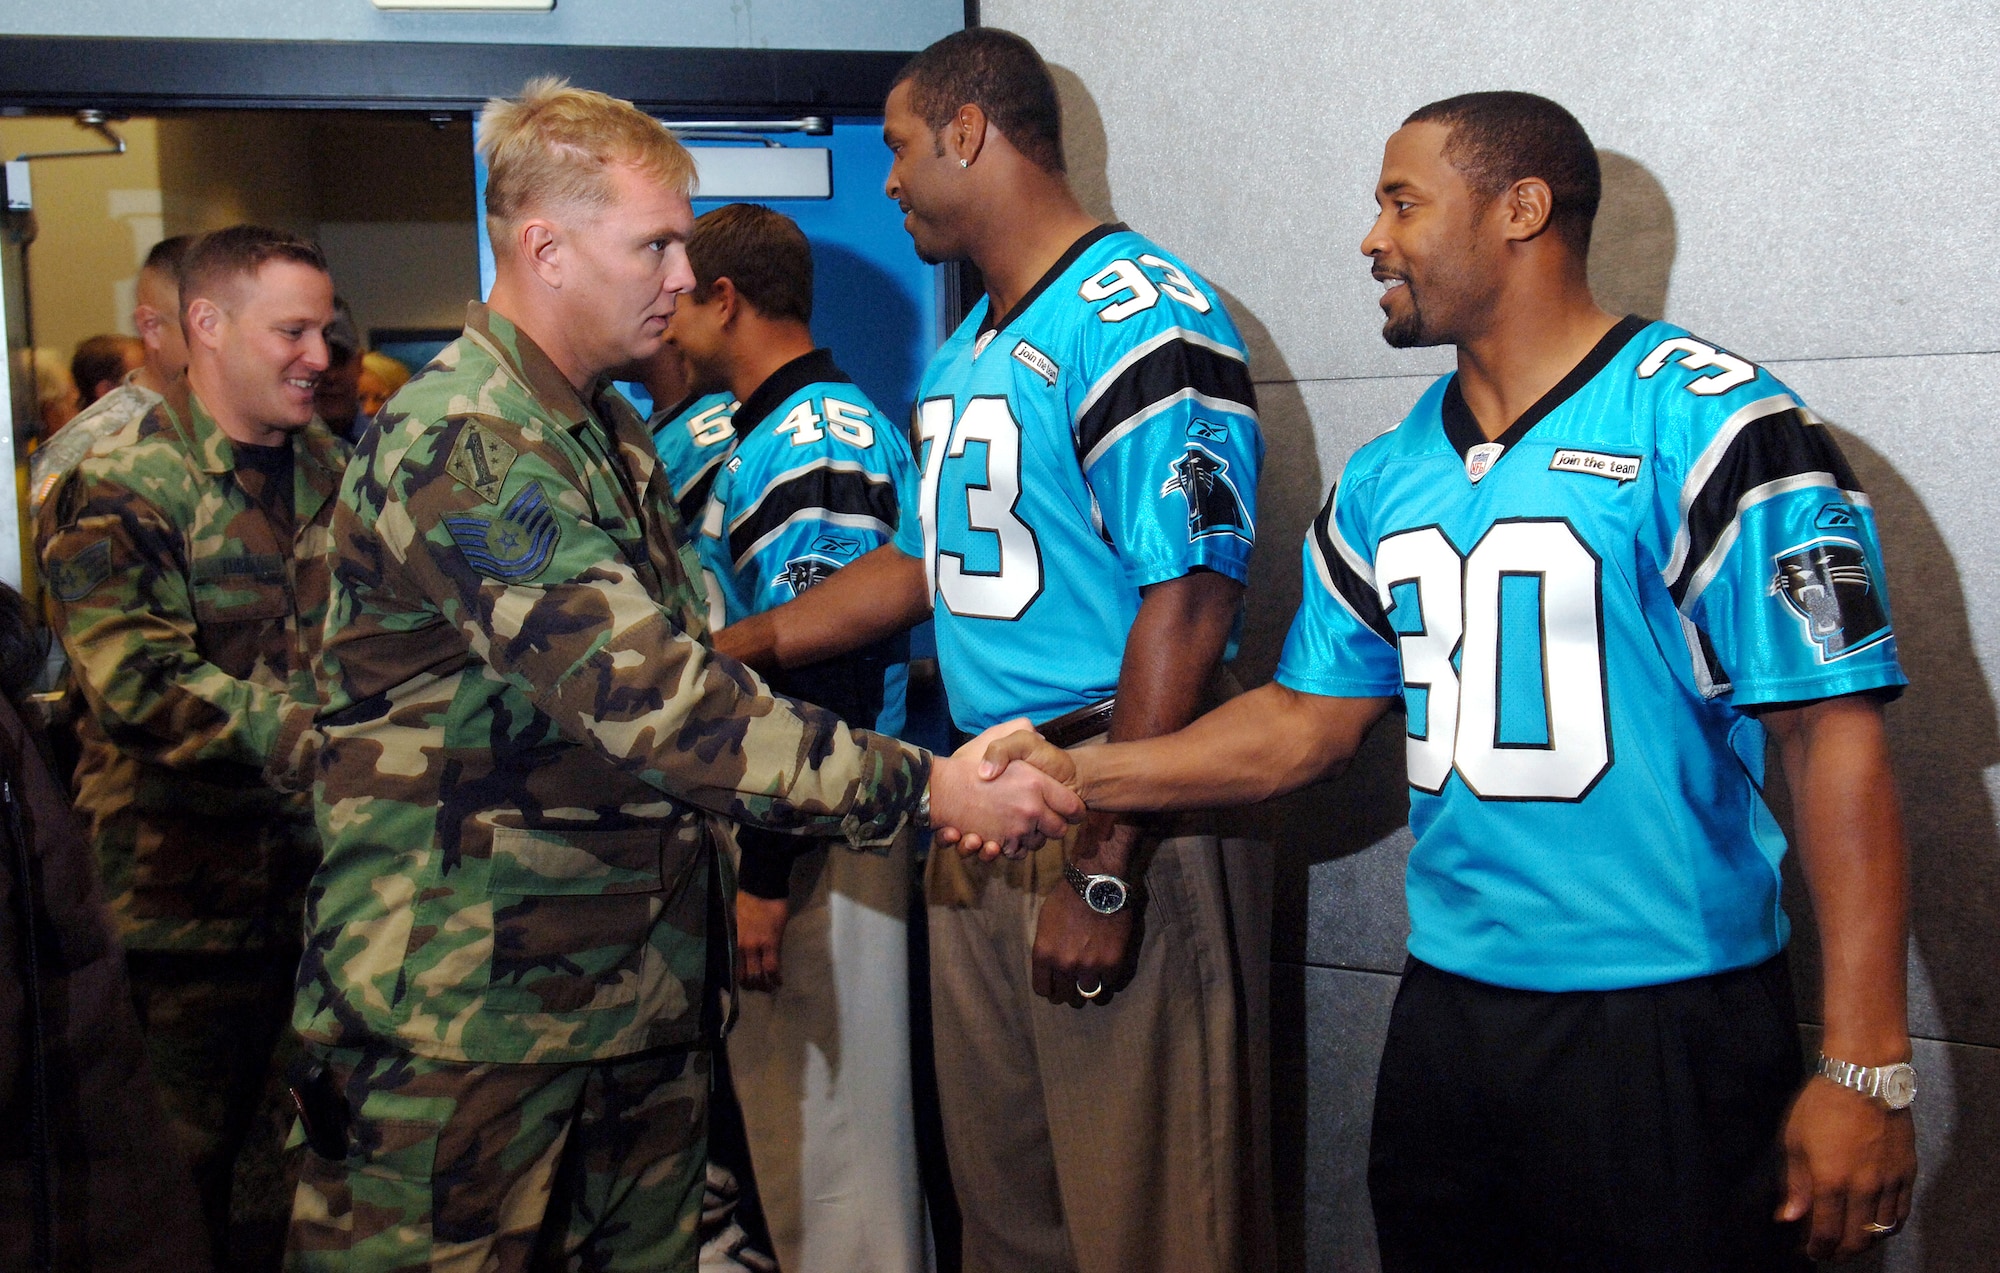 Tech. Sgt. Greg Overbay meets Carolina Panthers safety Mike Minter as part of Operation Welcome Home, inside the Bank of America Stadium, Charlotte N.C., on Oct. 24. OWH allowed military members from the Air Force, Army, Navy and Marines to tour the stadium and meet several players from the Carolina Panthers as a thank you after deploying in support of Operations Iraqi Freedom and Enduring Freedom. Sergeant Overbay is in the Air National Guard and is a tactical air controller with the 118th Air Support Operations Squadron, New London, N.C. (U.S. Air Force photo/Tech. Sgt. Larry A. Simmons)